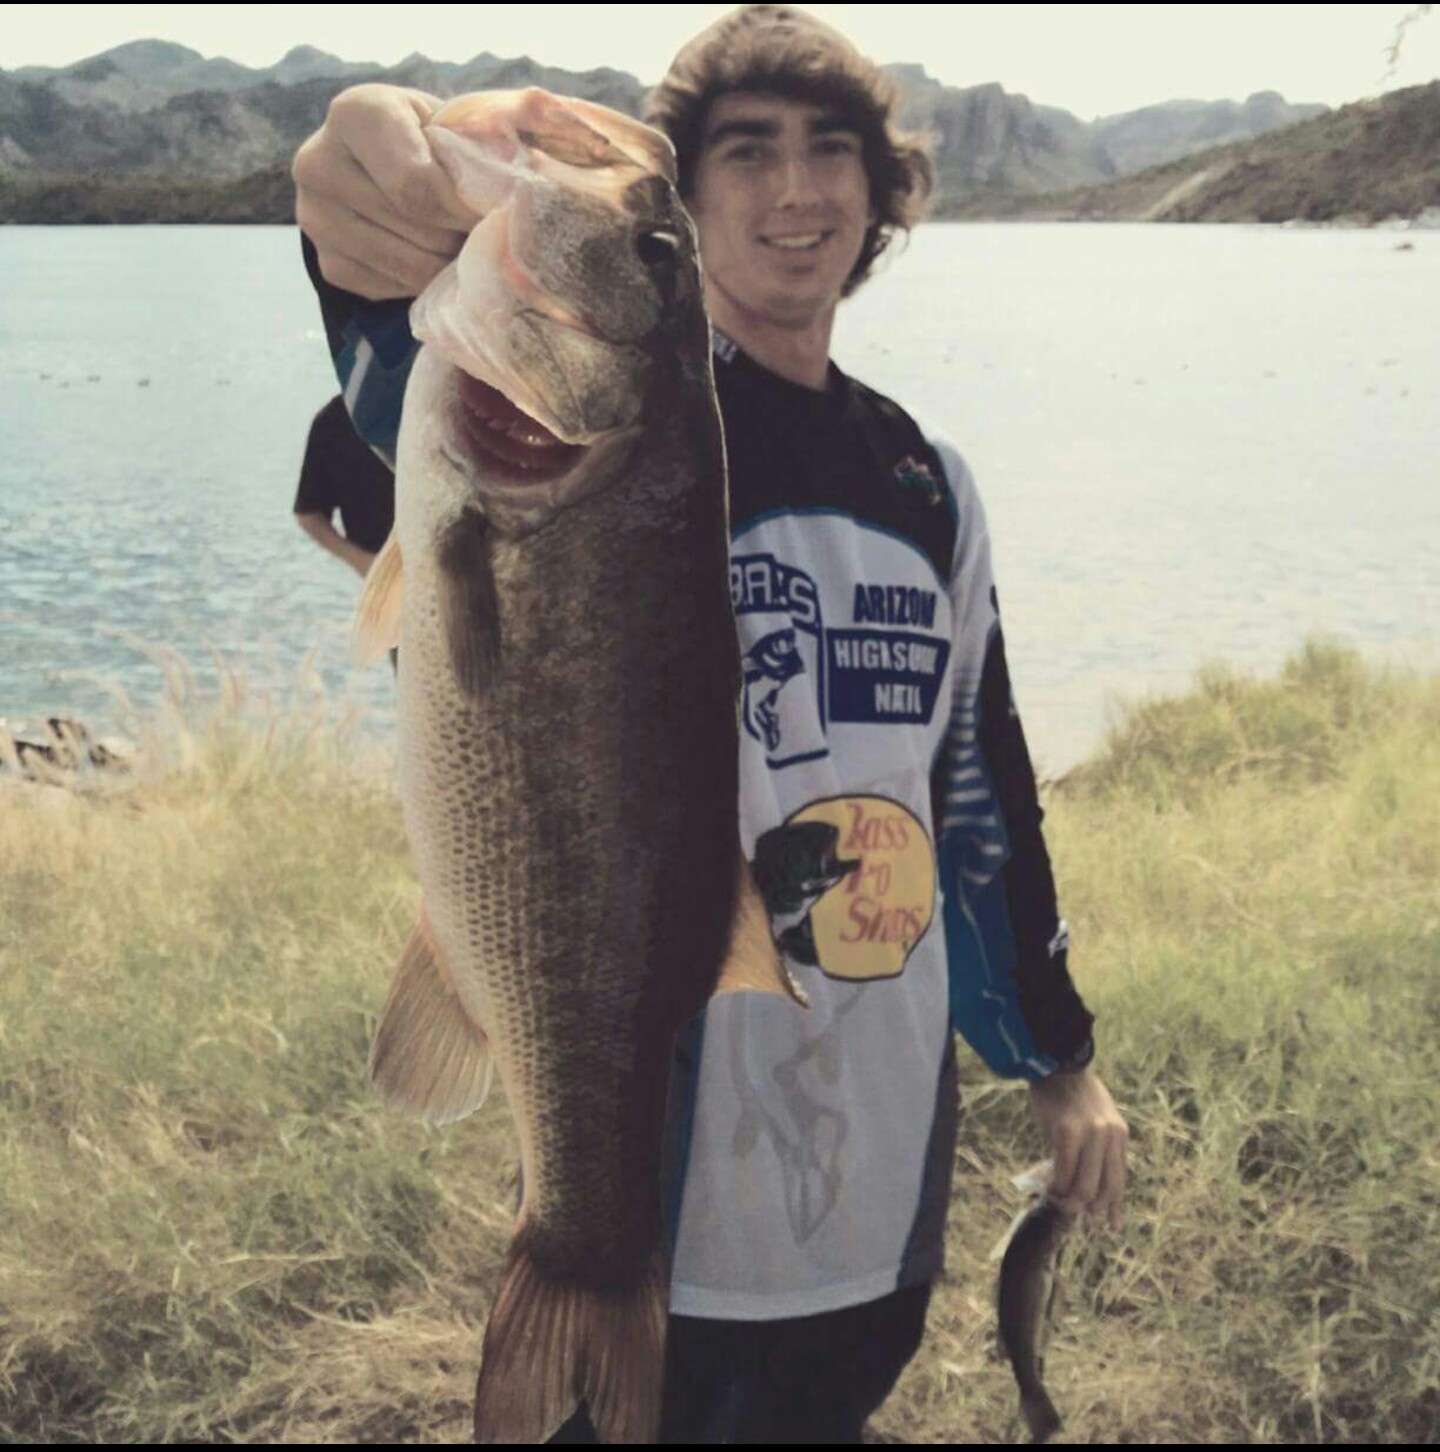 <b>Nathan Cummings, Peoria, Ariz.</b><br>
Cummings, a senior at Centennial High School, once struggled with severe physical and emotional limitations, according to school officials. He was unable to communicate effectively and seemed to have no academic future. Then, as a freshman, he found bass fishing. Through the sport, Cummings was able to deal with anxiety issues and overcome other challenges.
<p>
In the past 12 months, Cummings has won six tournaments, including the LetÃ¢ÂÂs Talk Fishing High School Championship. He has six other Top 20 finishes, and was ranked third in the state for the 2014/2015 season. More importantly, Cummings will be graduating on time and now has superior communication skills, which he employs while volunteering at the kids casting pond at CabelaÃ¢ÂÂs in Glendale, Ariz.